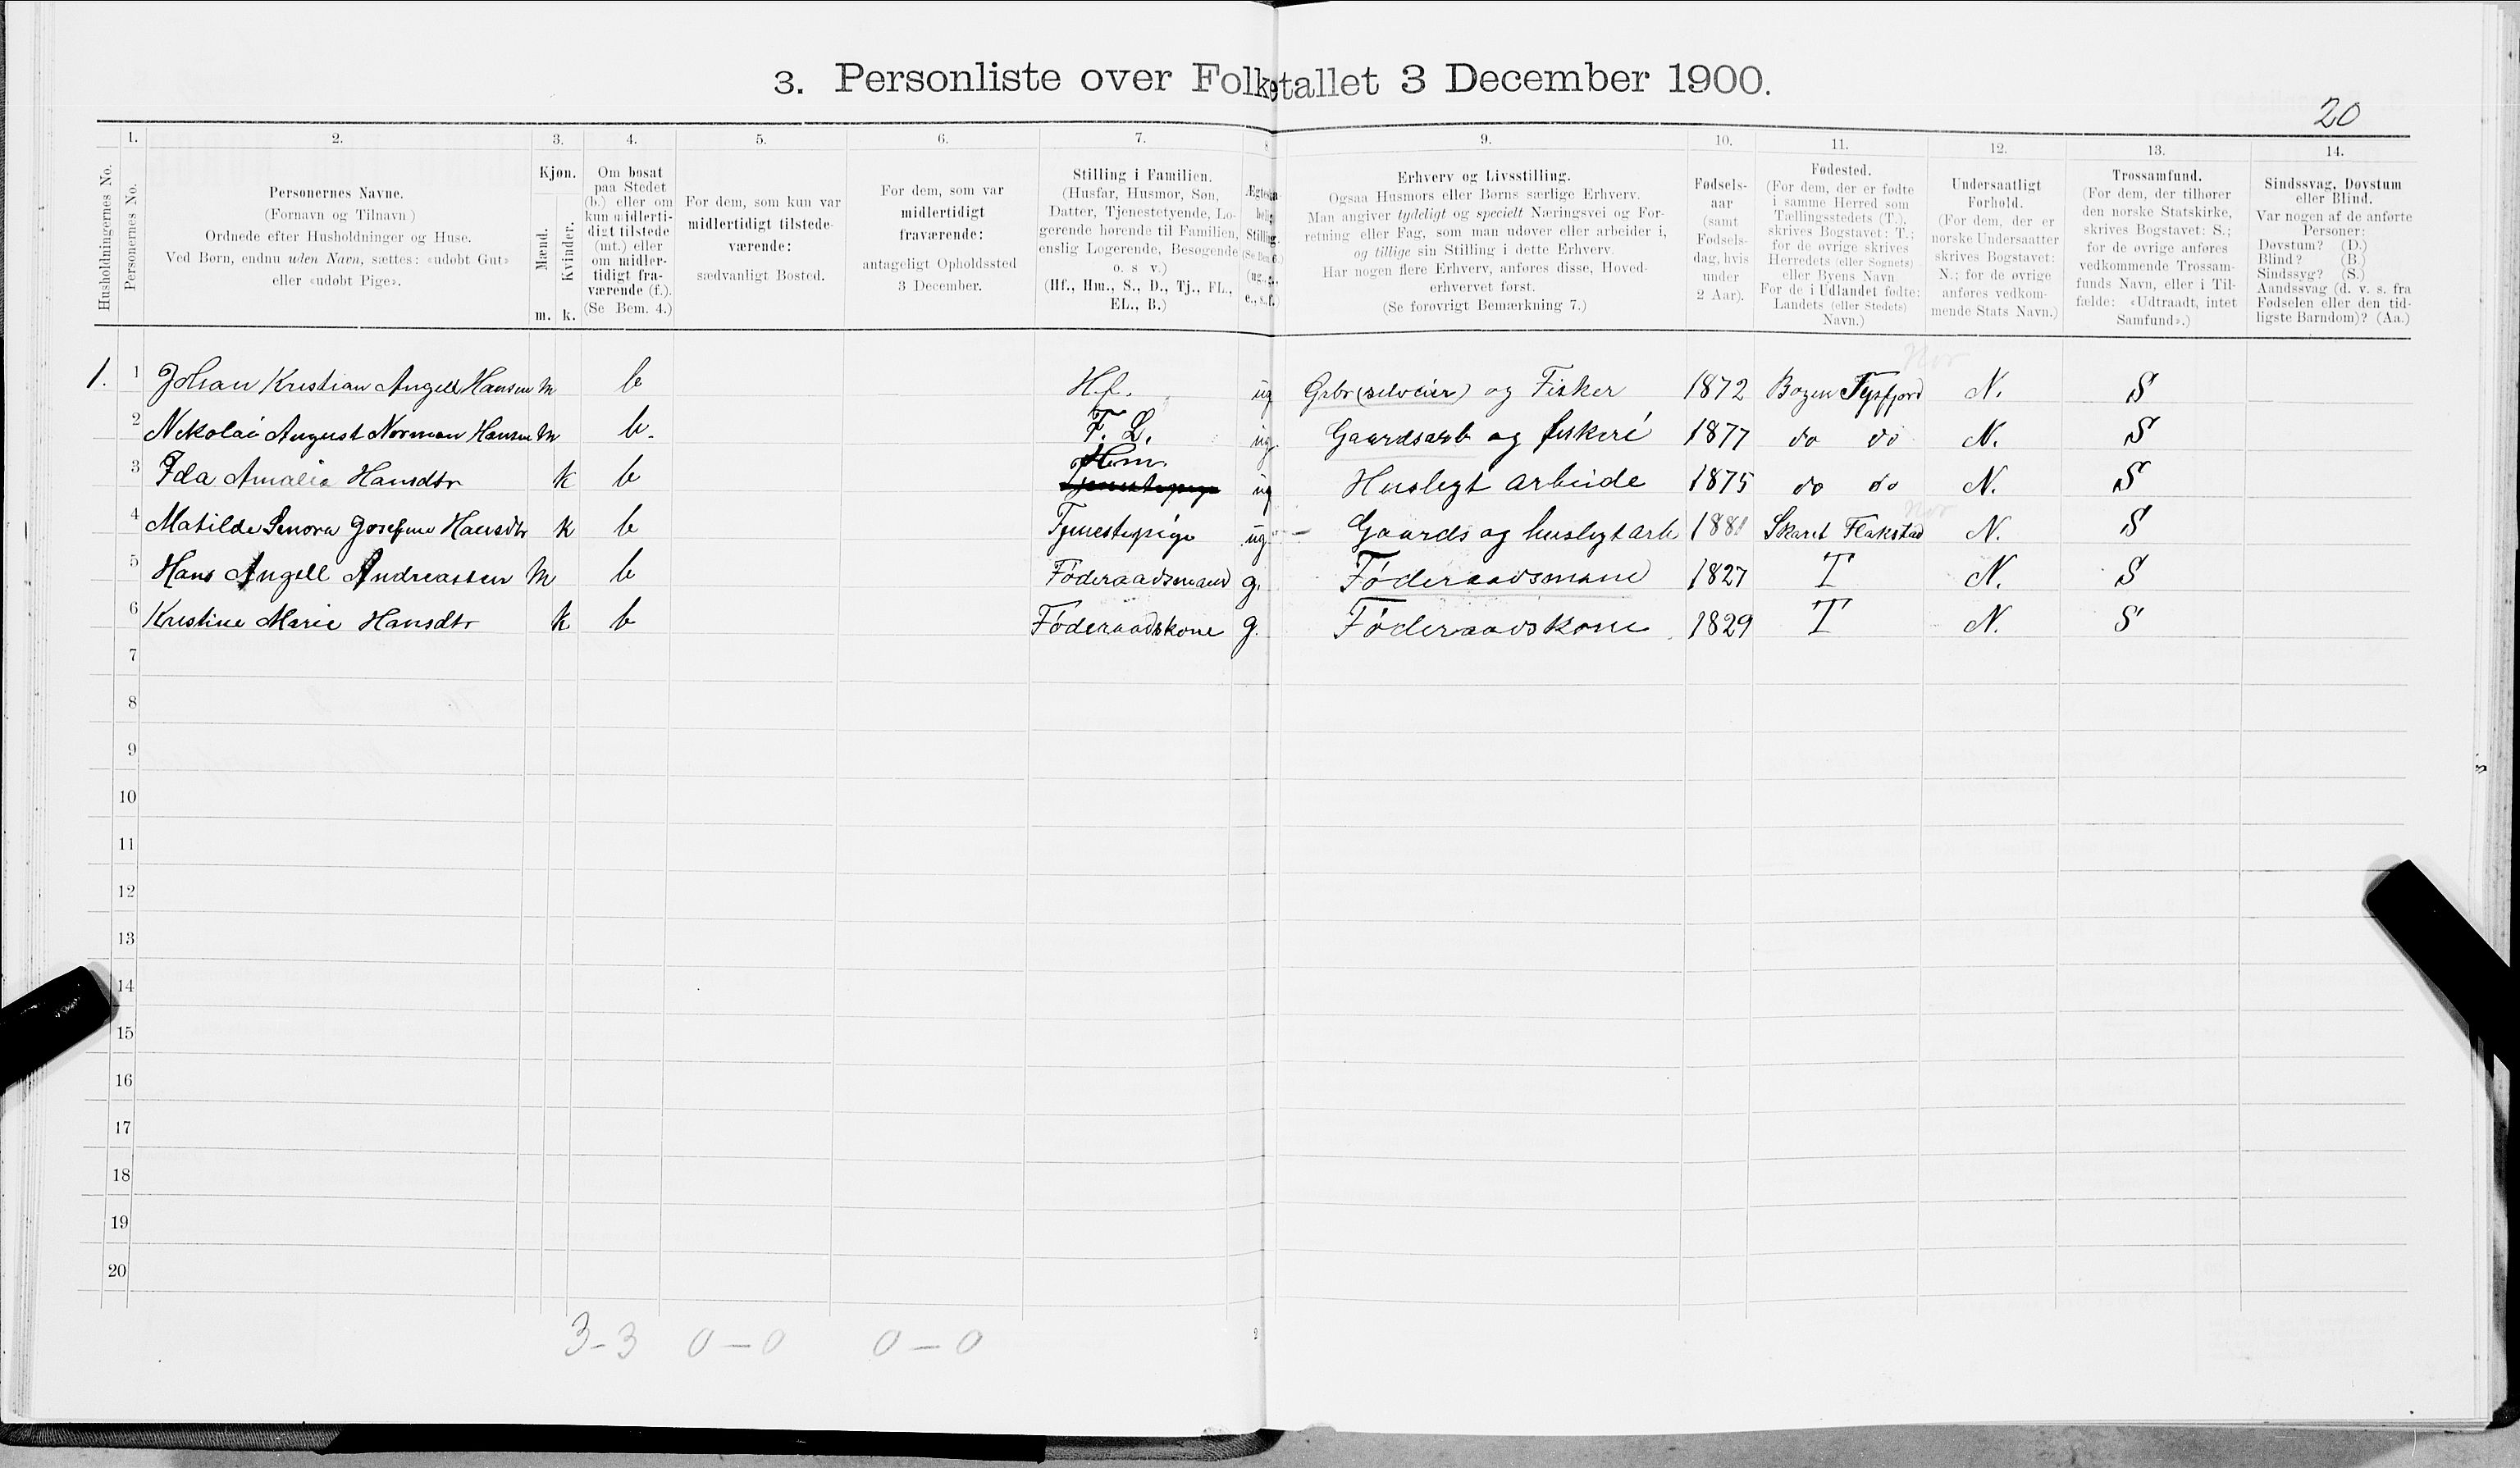 SAT, 1900 census for Hamarøy, 1900, p. 509